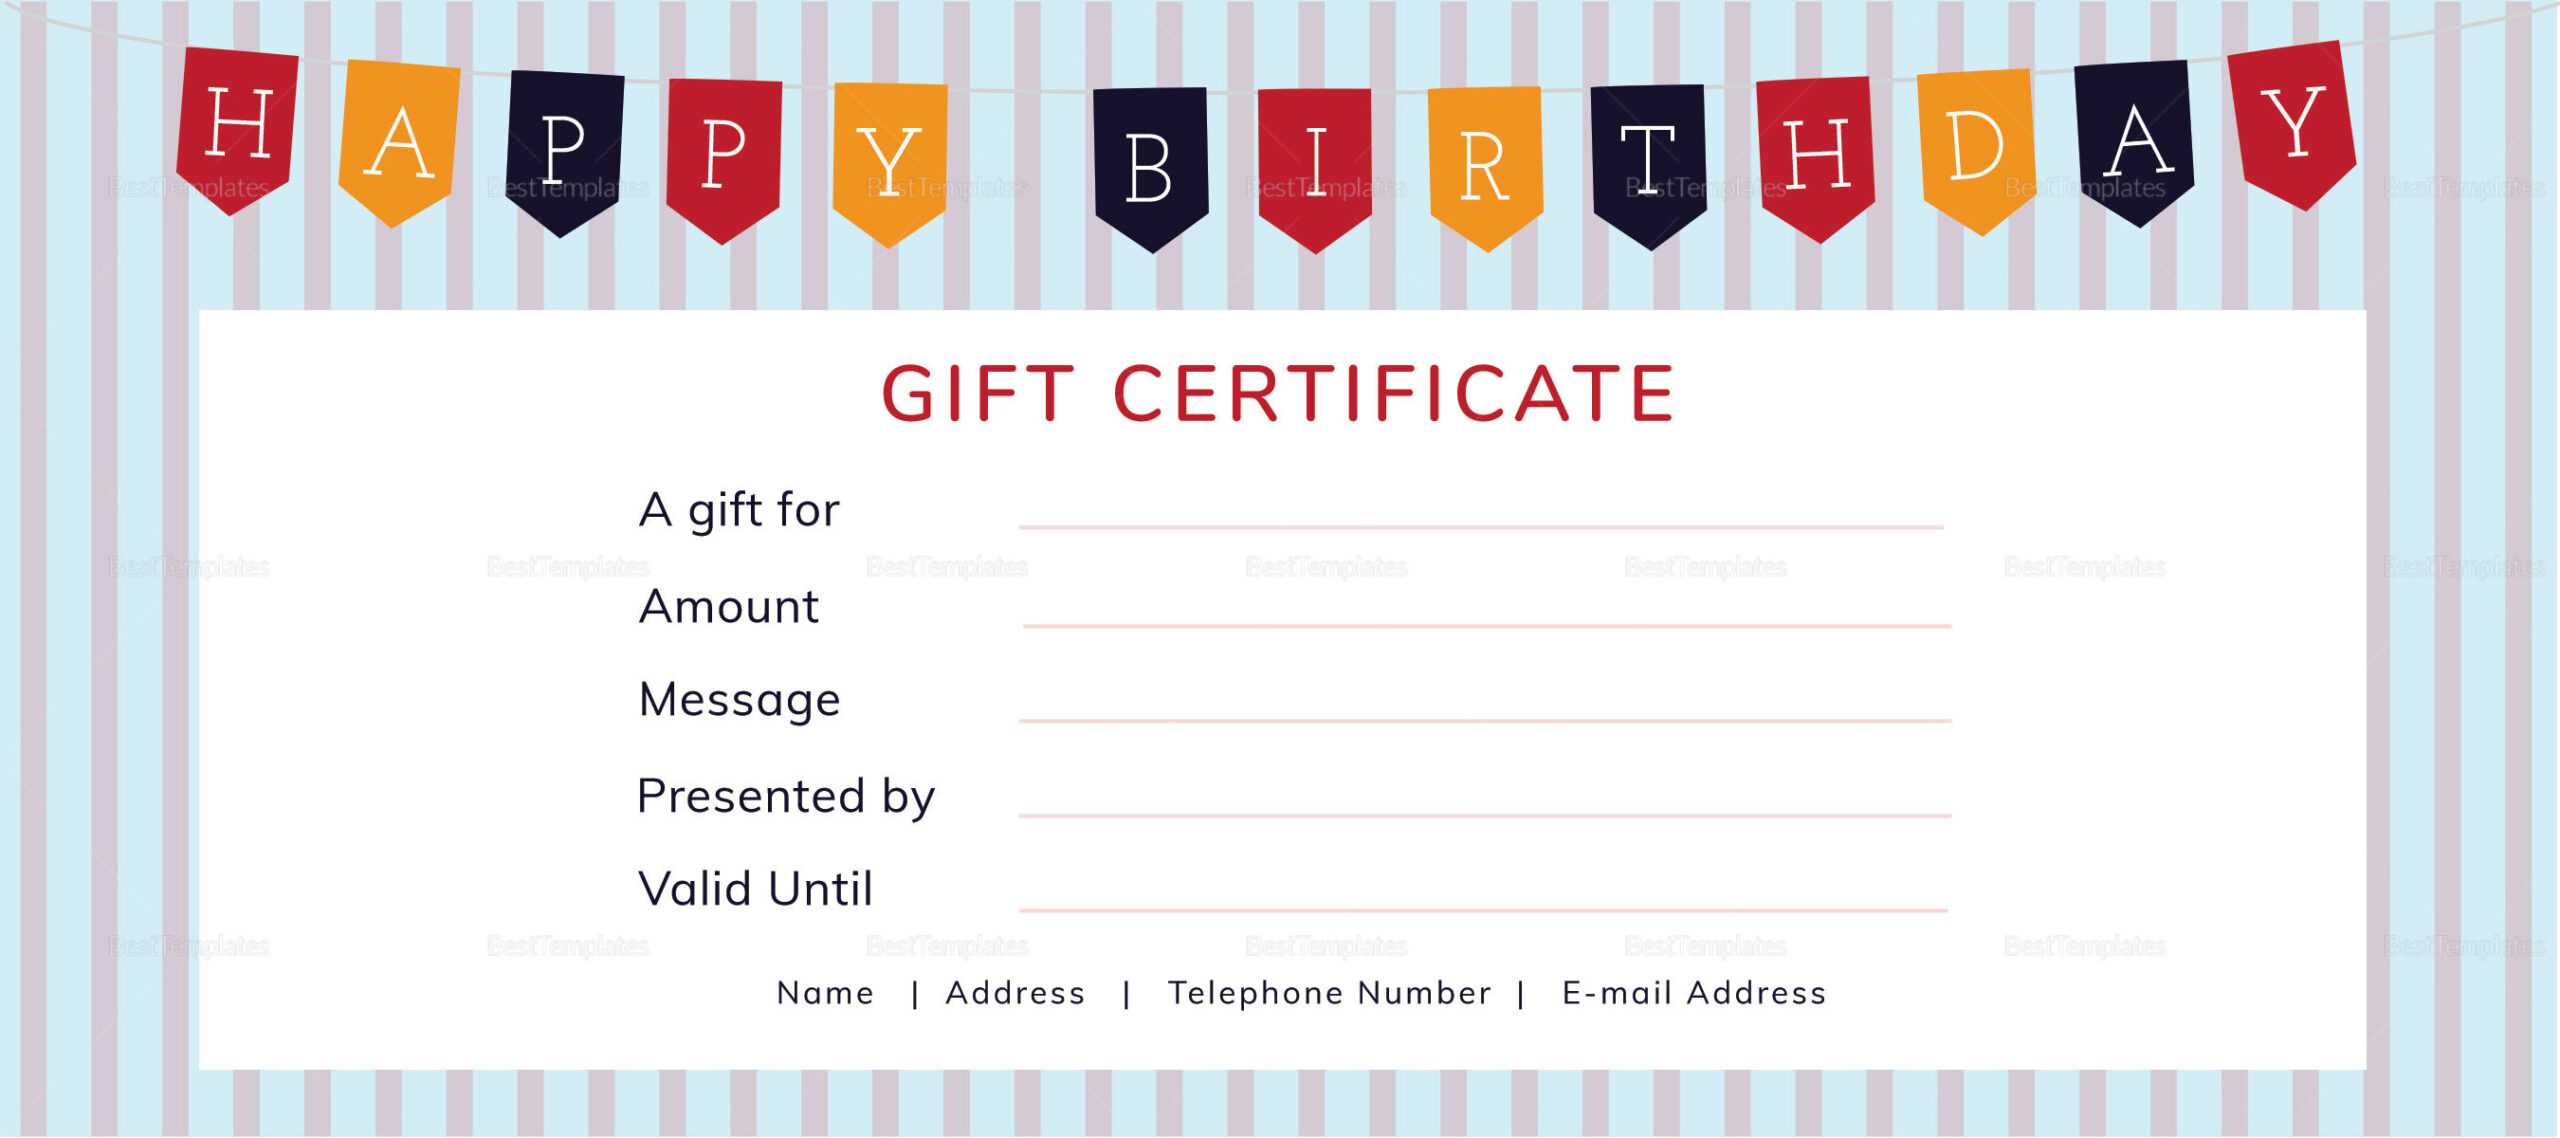 Happy Birthday Gift Certificate Template Inside Indesign Gift Certificate Template